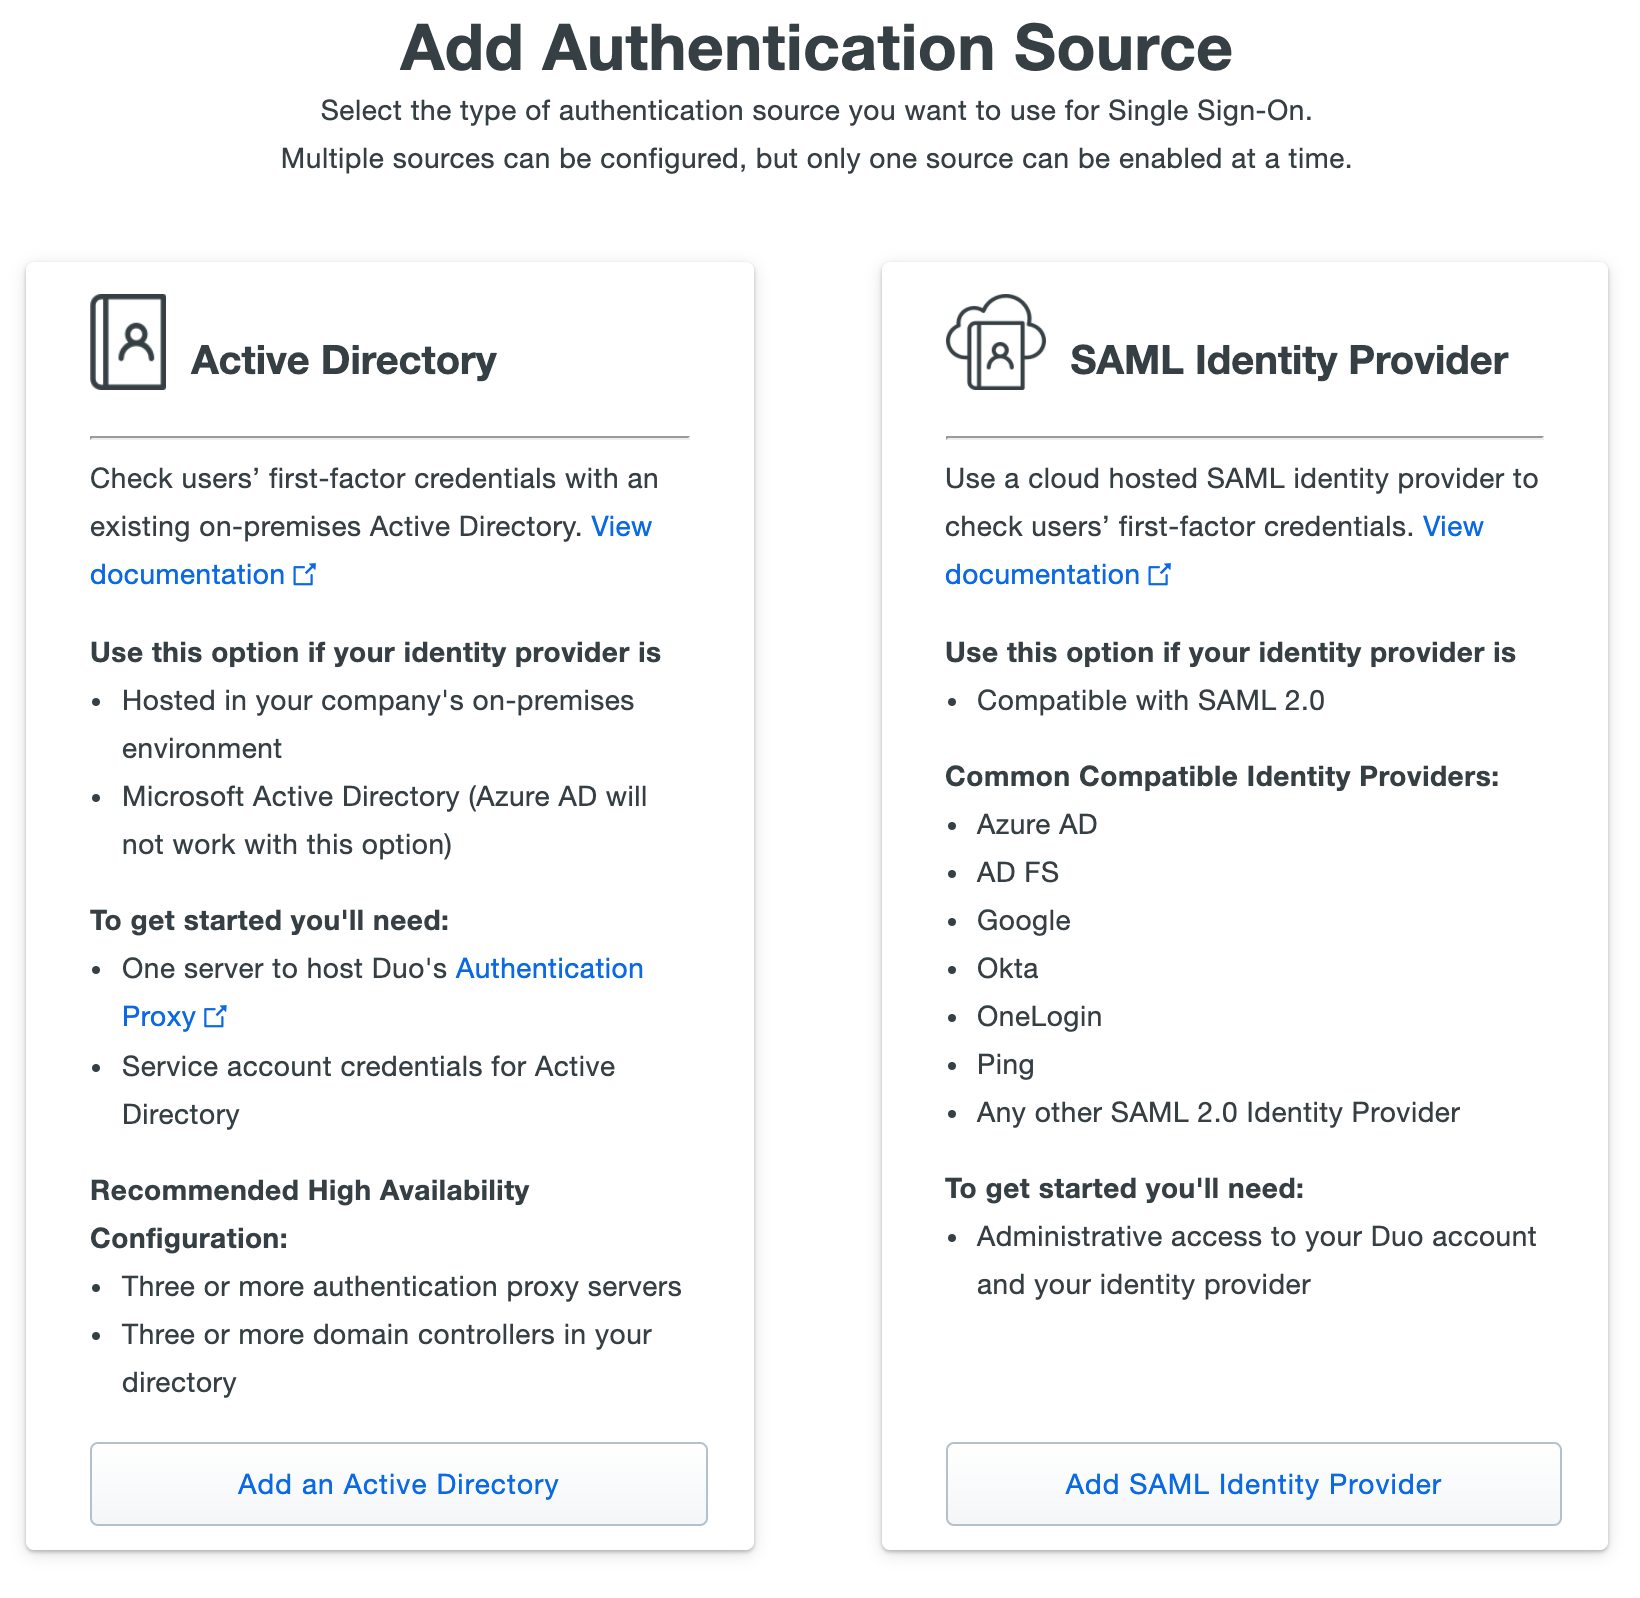 Choosing an authentication source during setup